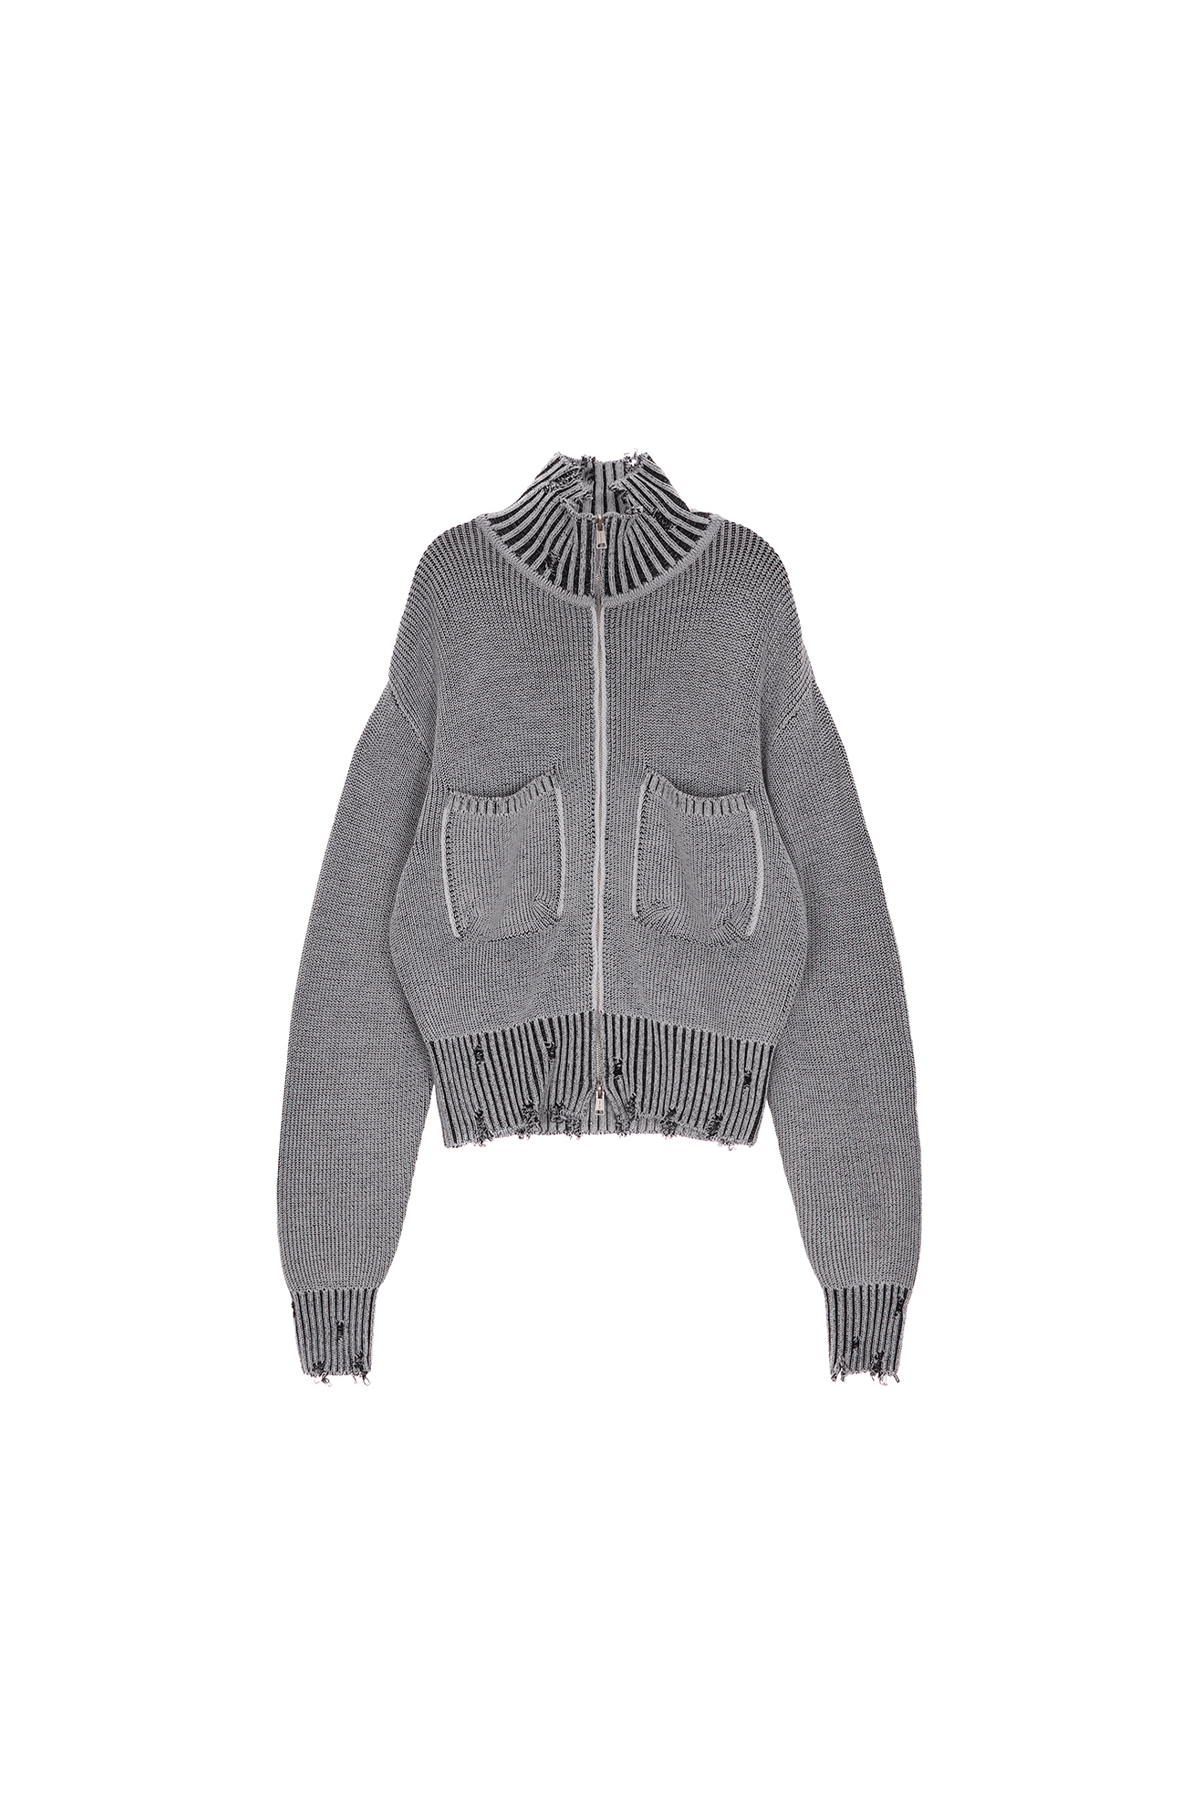 COLOR RIBBED HIGH NECK ZIP UP IN LIGHT GREY